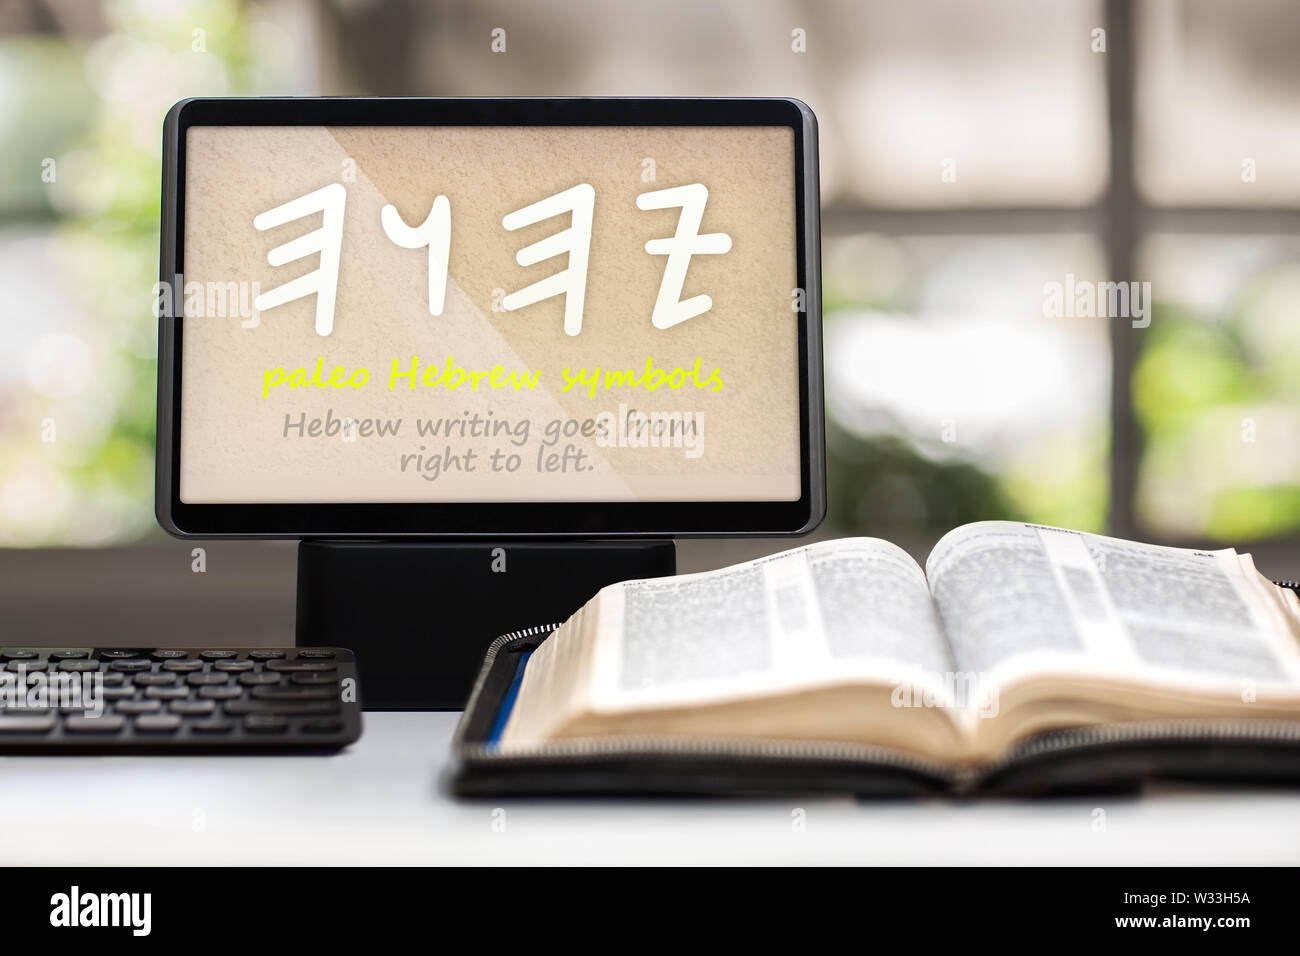 A tablet showing the paleo Hebrew symbols for the name of God on a desk with a keyboard, opened holy bible and cross in background. Stock Photo